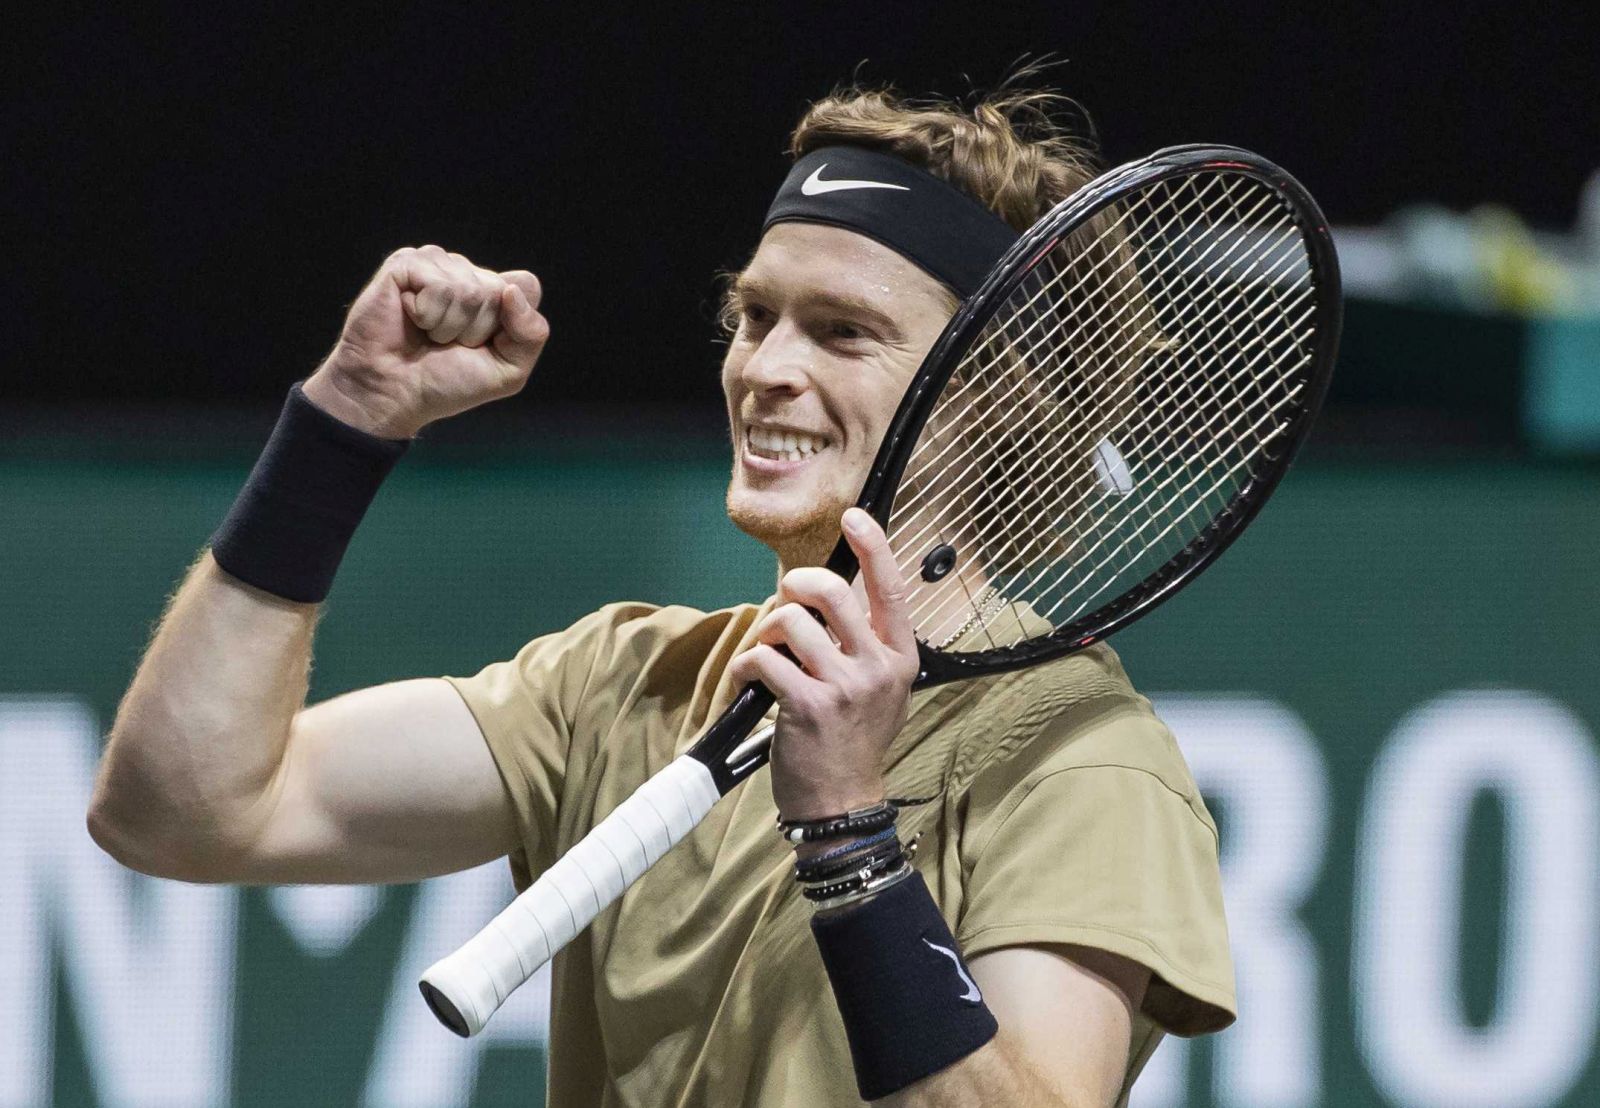 epa09059838 Andrey Rublev of Russia reacts after winning the final of the ABN AMRO World Tennis Tournament against Marton Fucsovics of Hungary in Rotterdam, Netherlands, 07 March 2021.  EPA/Koen Suyk